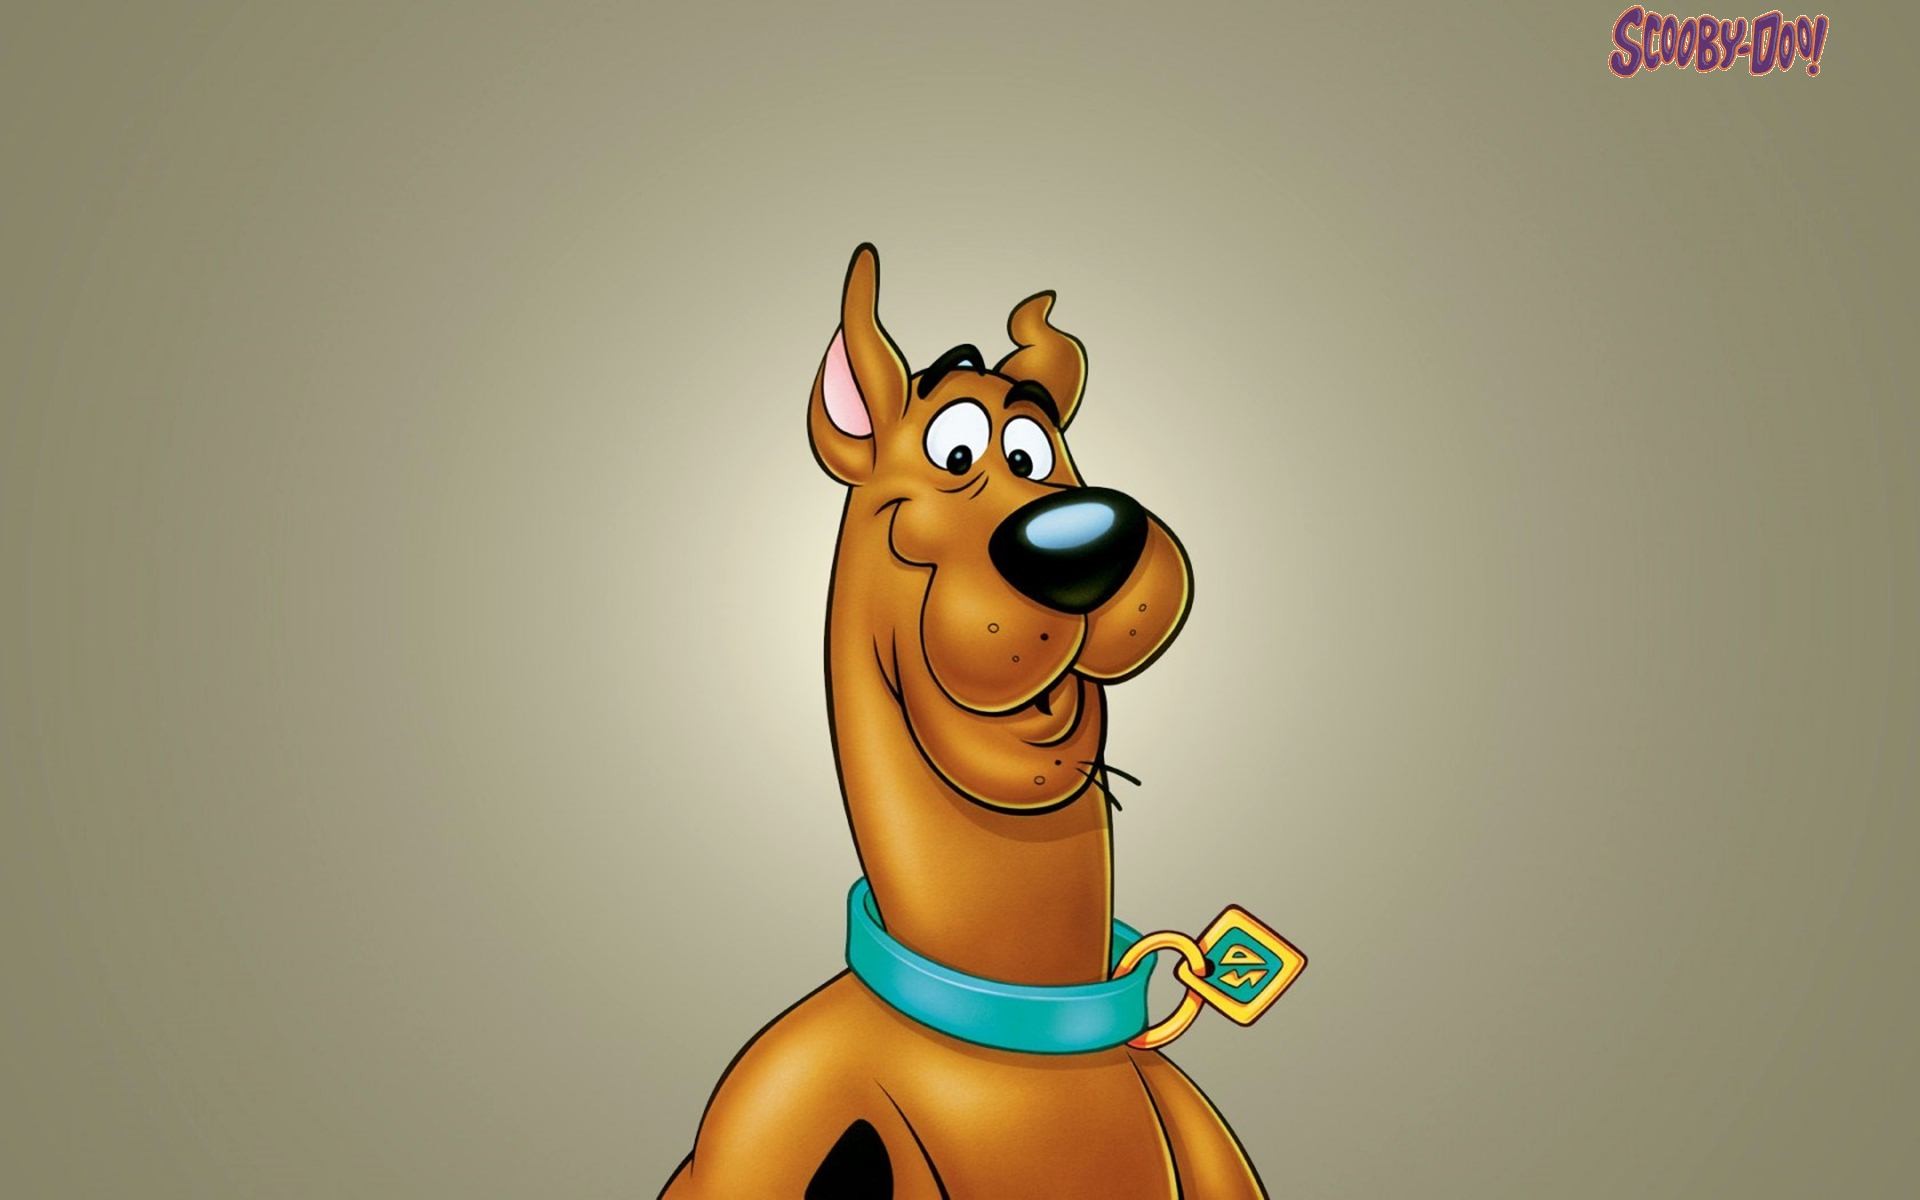 Official Wallpaper Of Scooby From Doo Paperpull